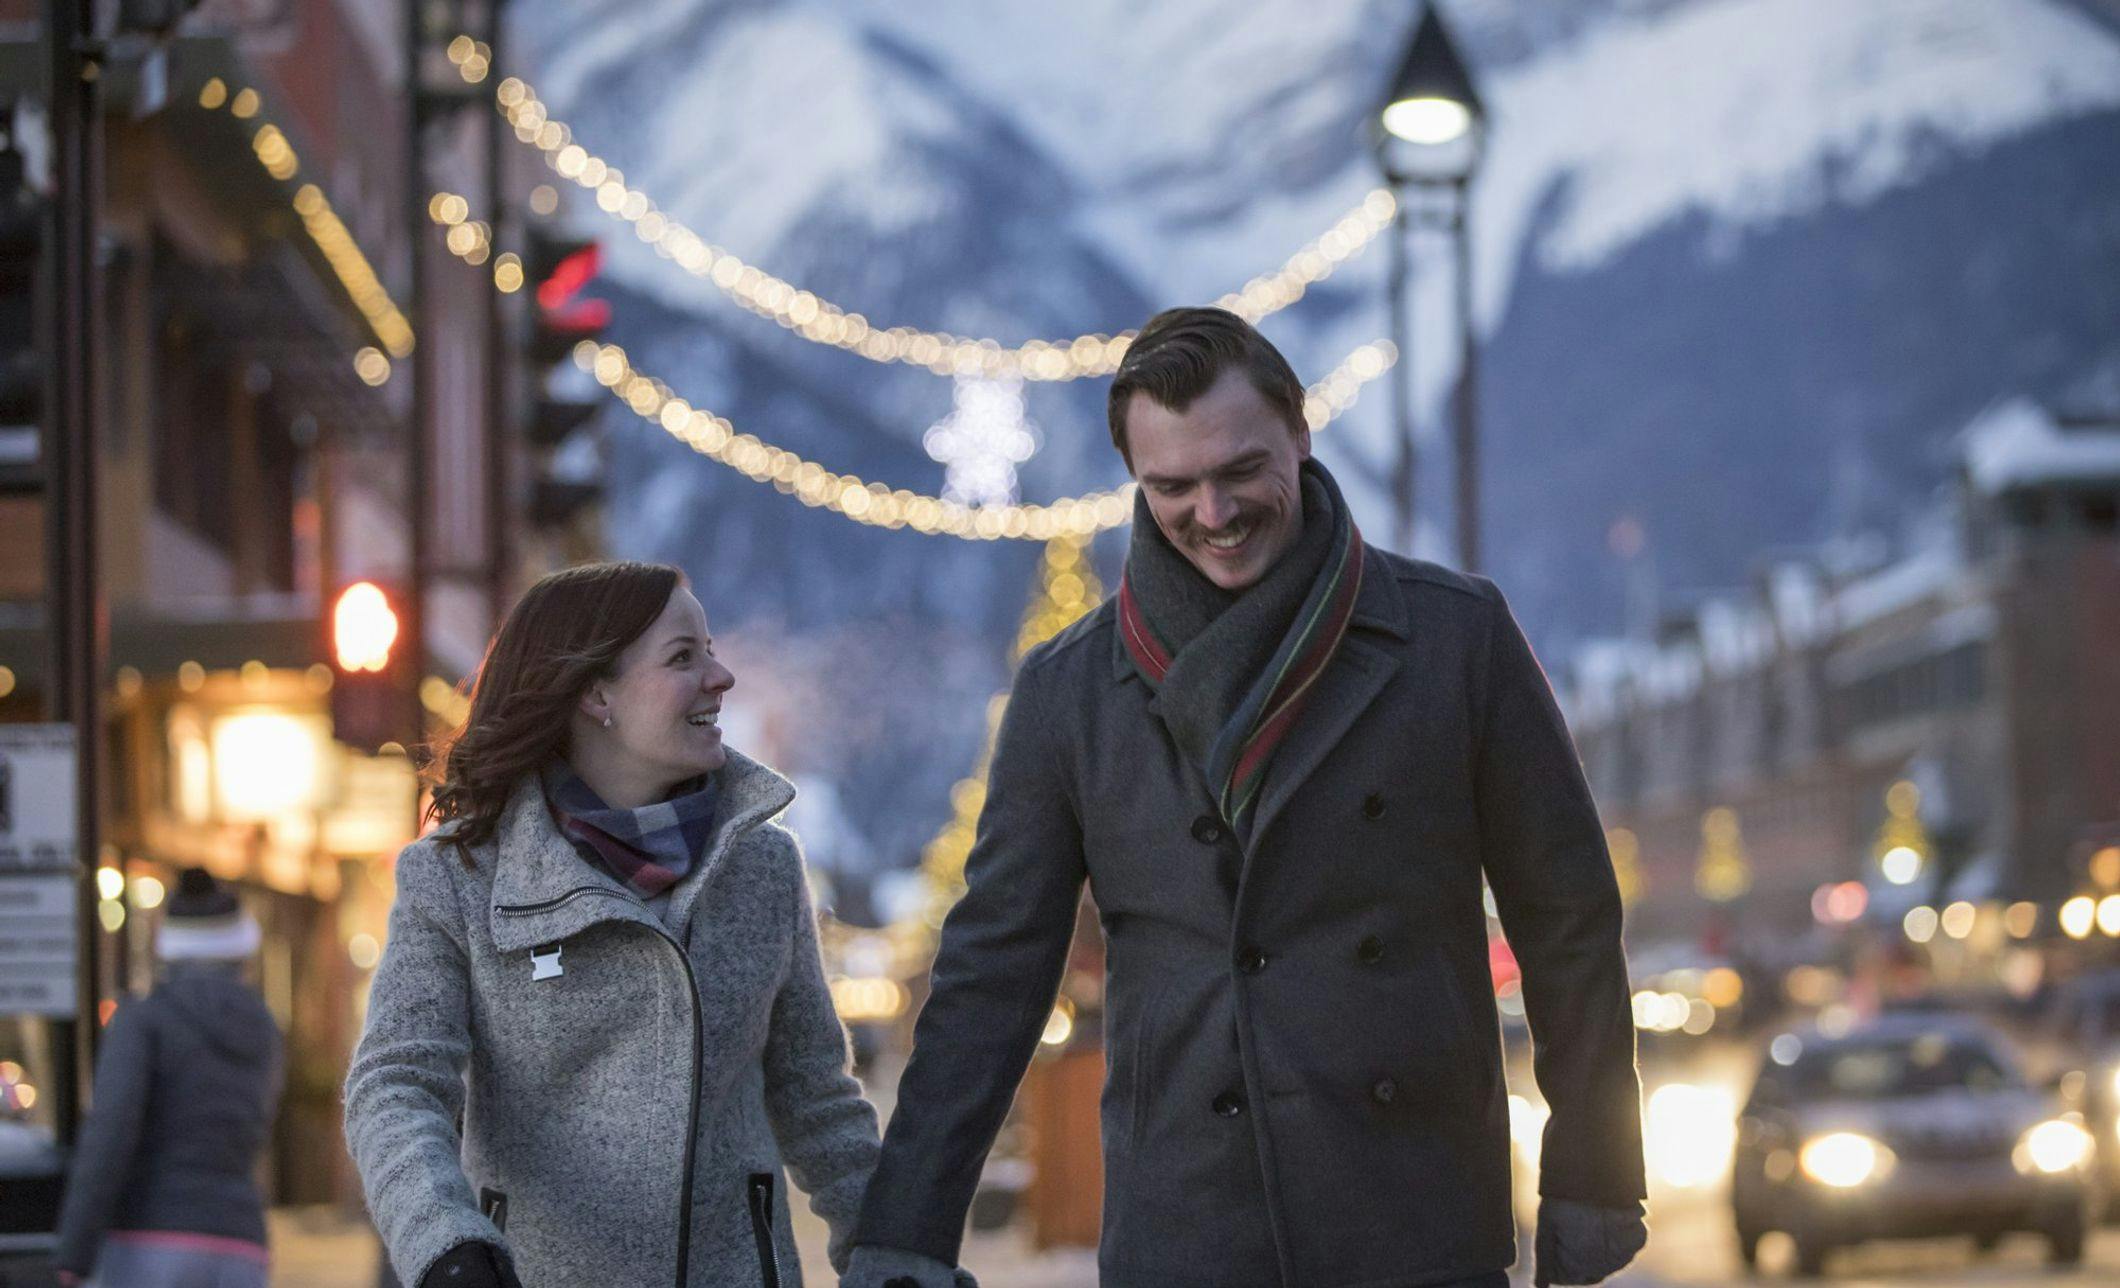 A couple walking downtown in the winter with Christmas lights in the background